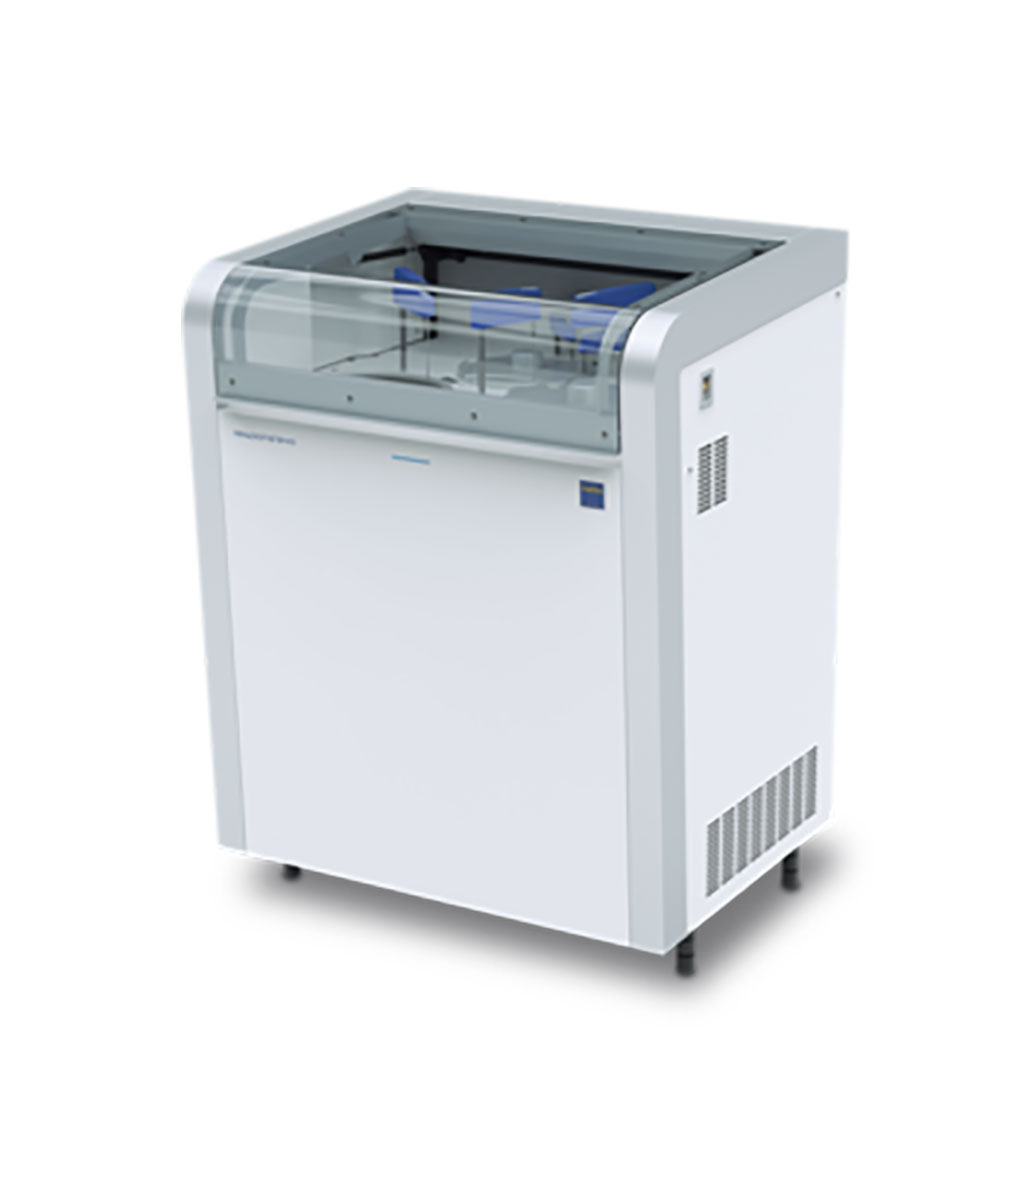 Image: The respons®940 automated random access clinical chemistry analyzer (Photo courtesy of DiaSys)